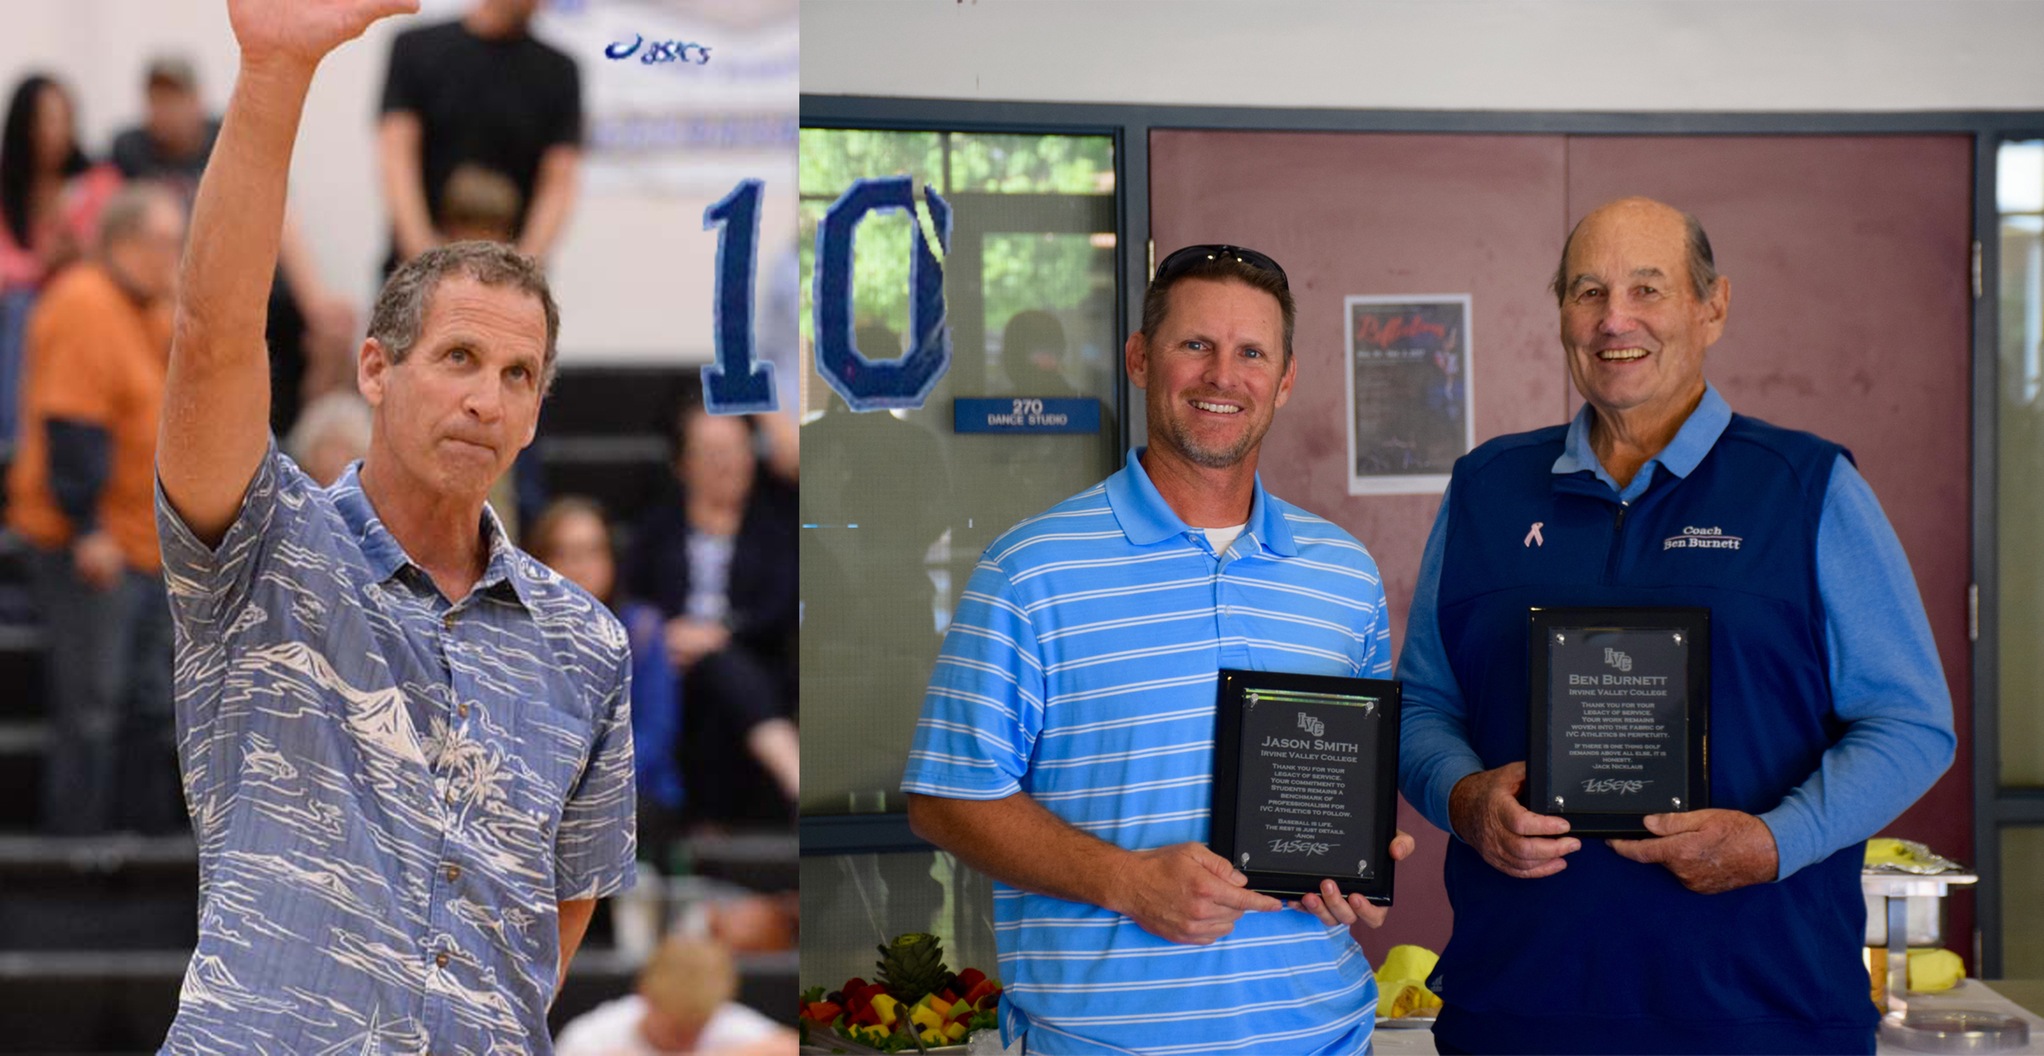 No. 10 Story of the Year - Irvine Valley storied coaches move on